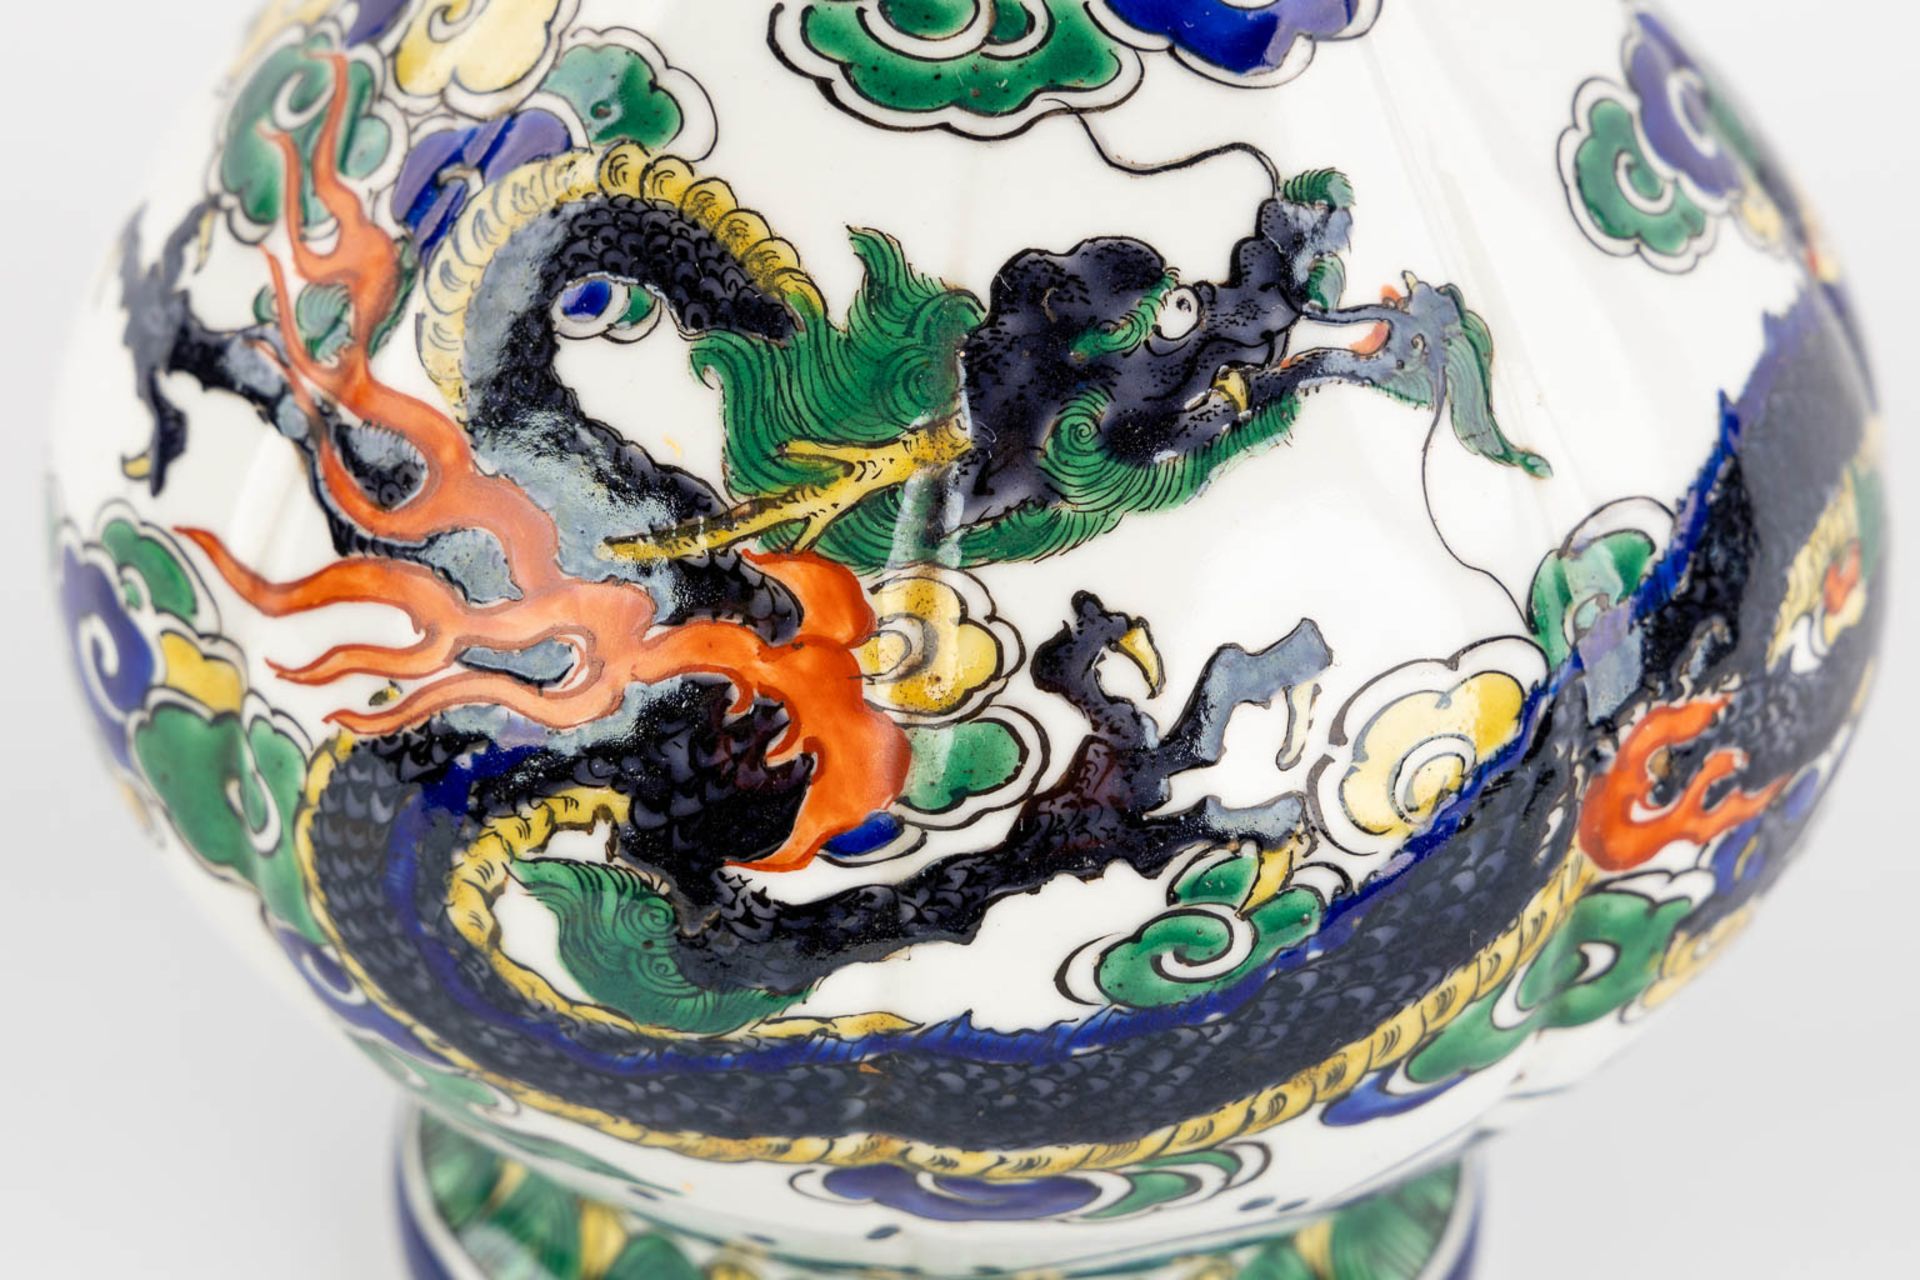 An antique Japanese vase with a three clawed dragon decor, 19th C. (H:30 x D:18 cm) - Image 9 of 10